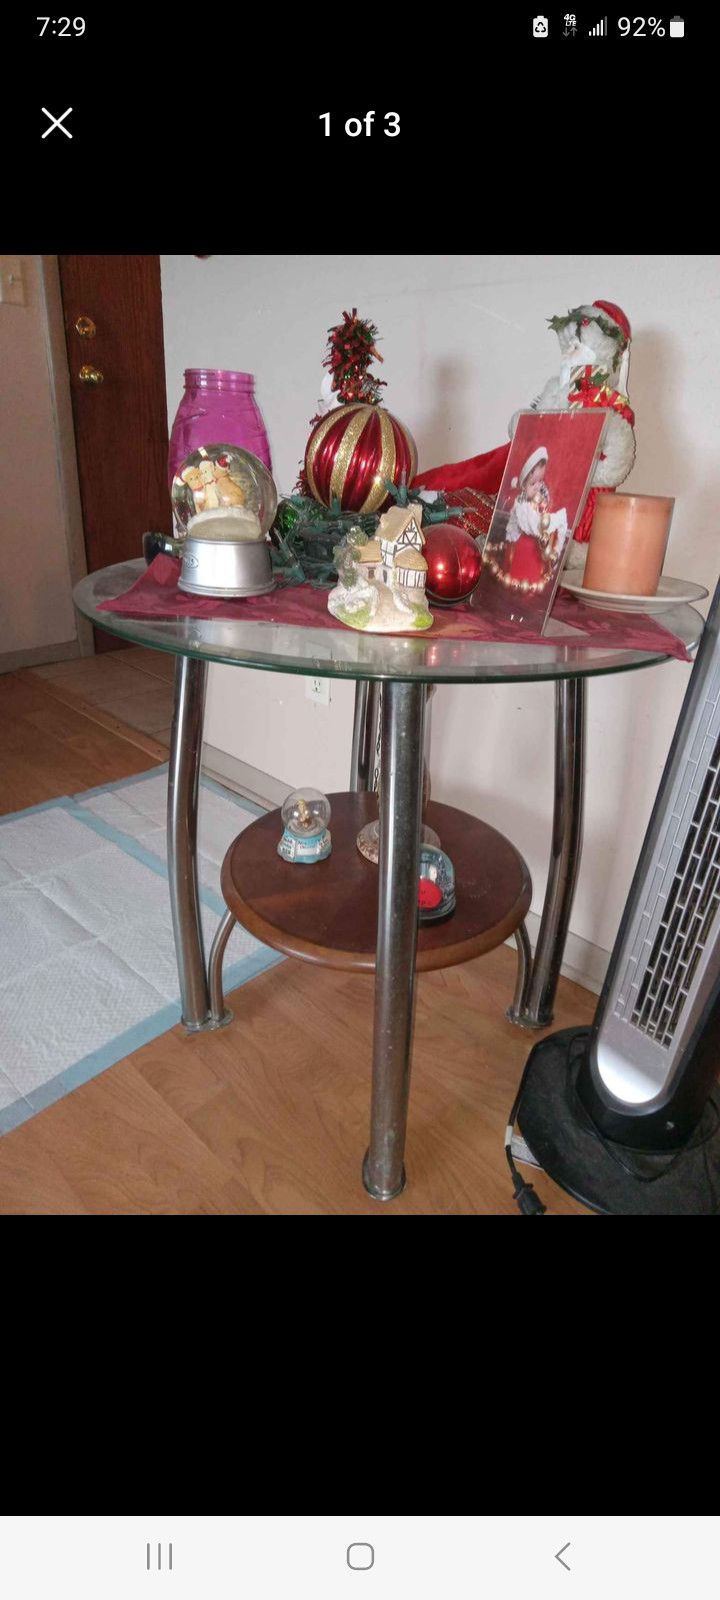 Glass End Table